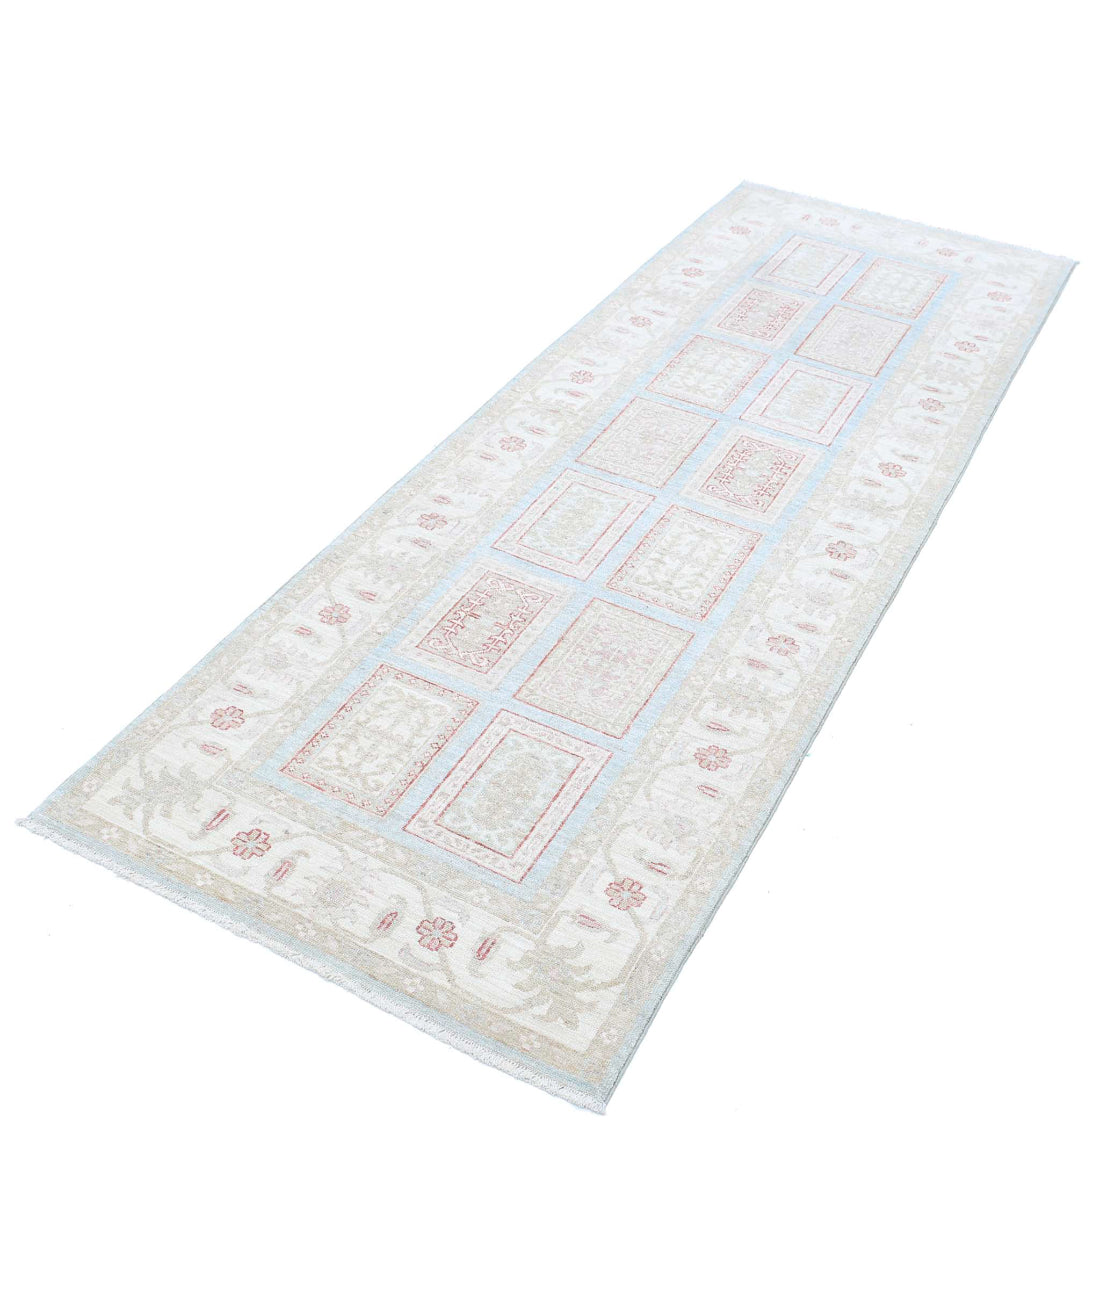 Hand Knotted Serenity Wool Rug - 2'9'' x 7'9'' 2'9'' x 7'9'' (83 X 233) / Blue / Ivory